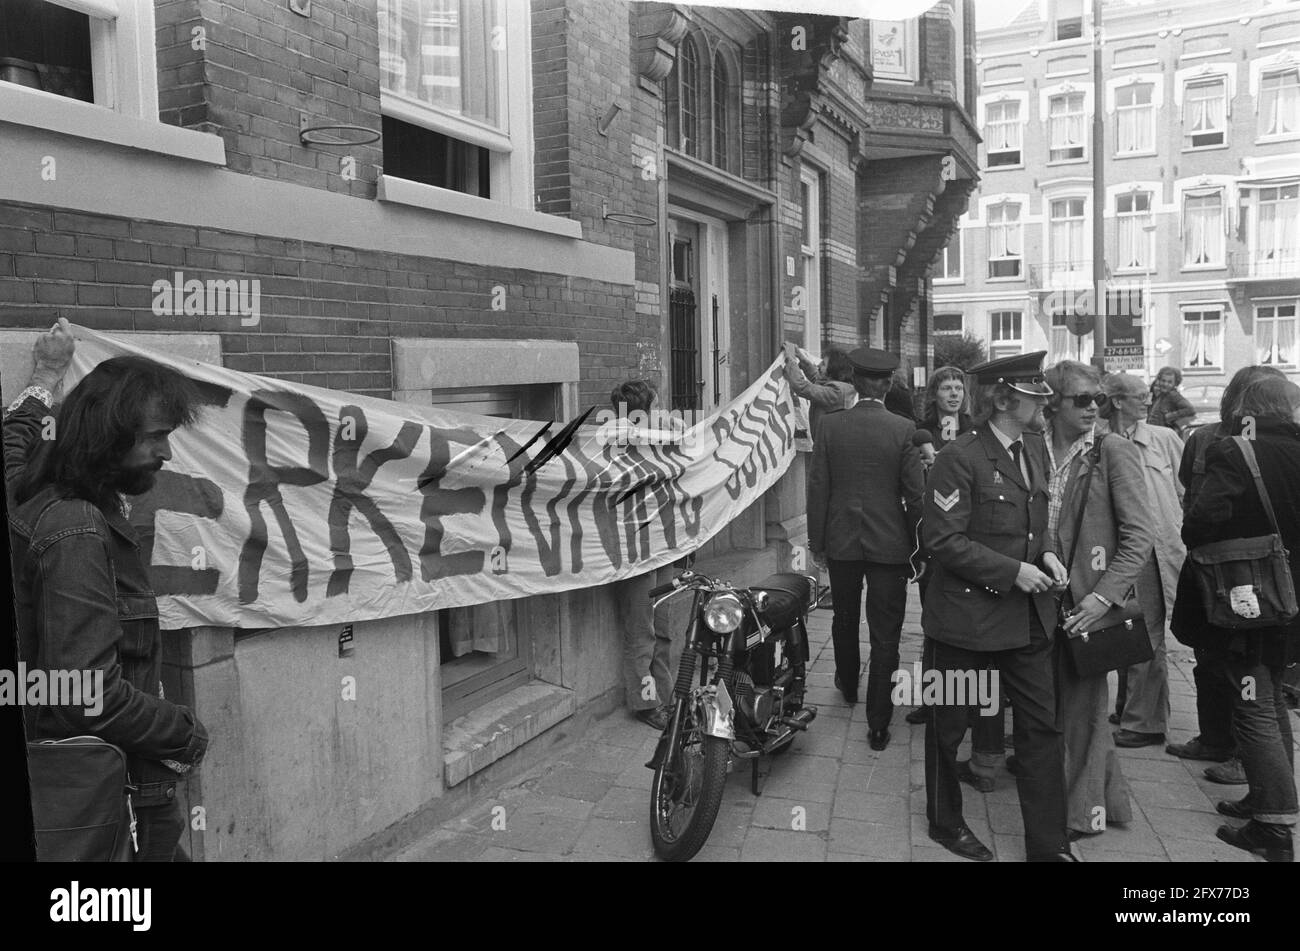 Action group tries to occupy PvdA party office in Amsterdam in connection with recognition of Guinea Bissau, banner on wall of building, 28 May 1974, action groups, occupations, buildings, banners, The Netherlands, 20th century press agency photo, news to remember, documentary, historic photography 1945-1990, visual stories, human history of the Twentieth Century, capturing moments in time Stock Photo